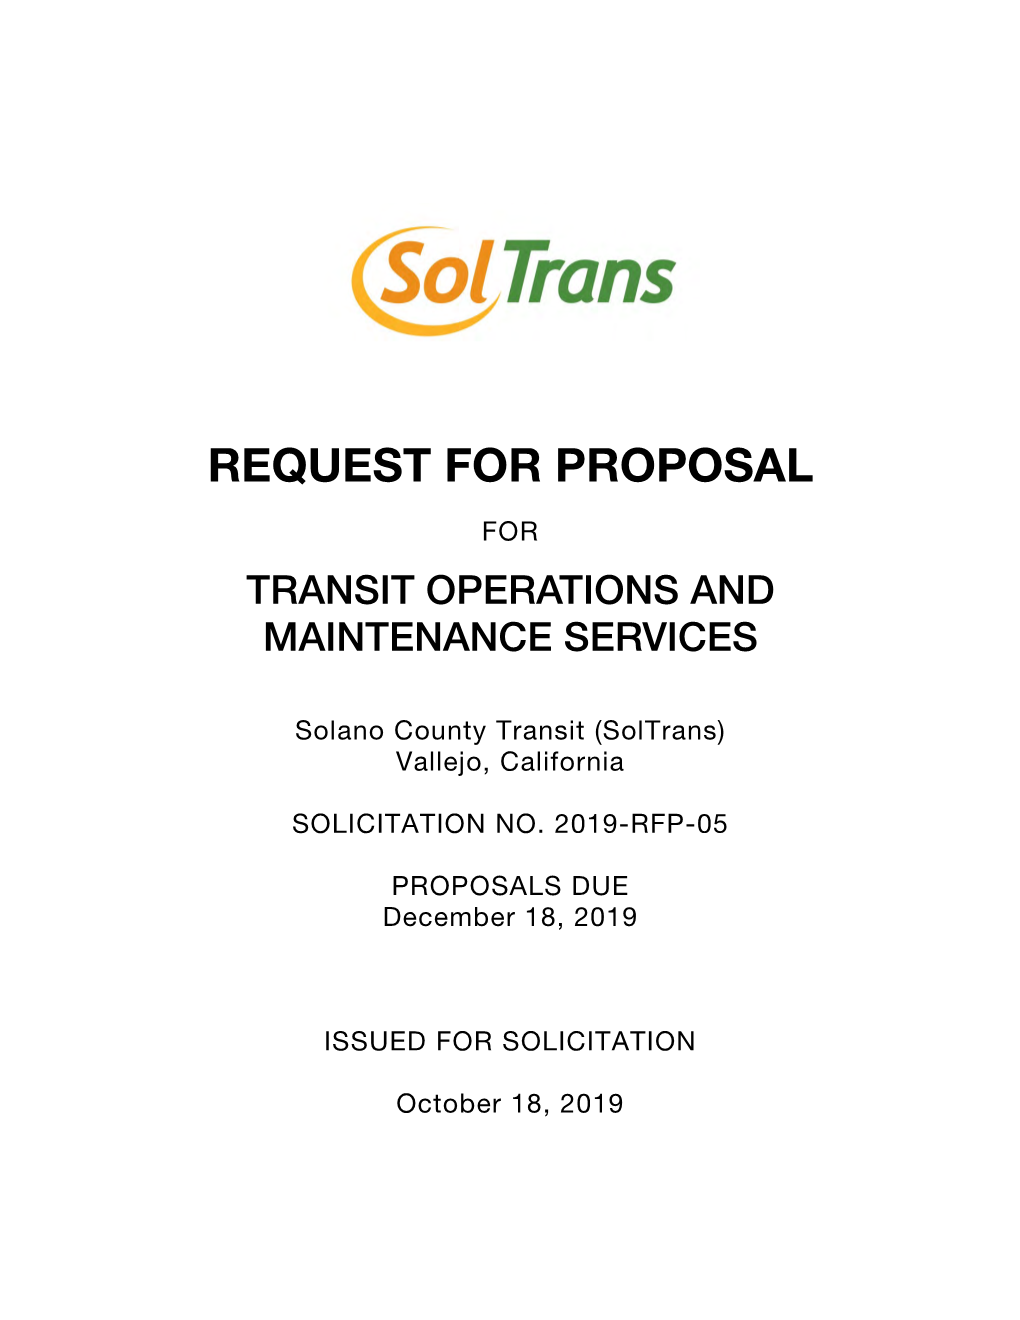 Soltrans 2019 Transit Operations and Maintenance